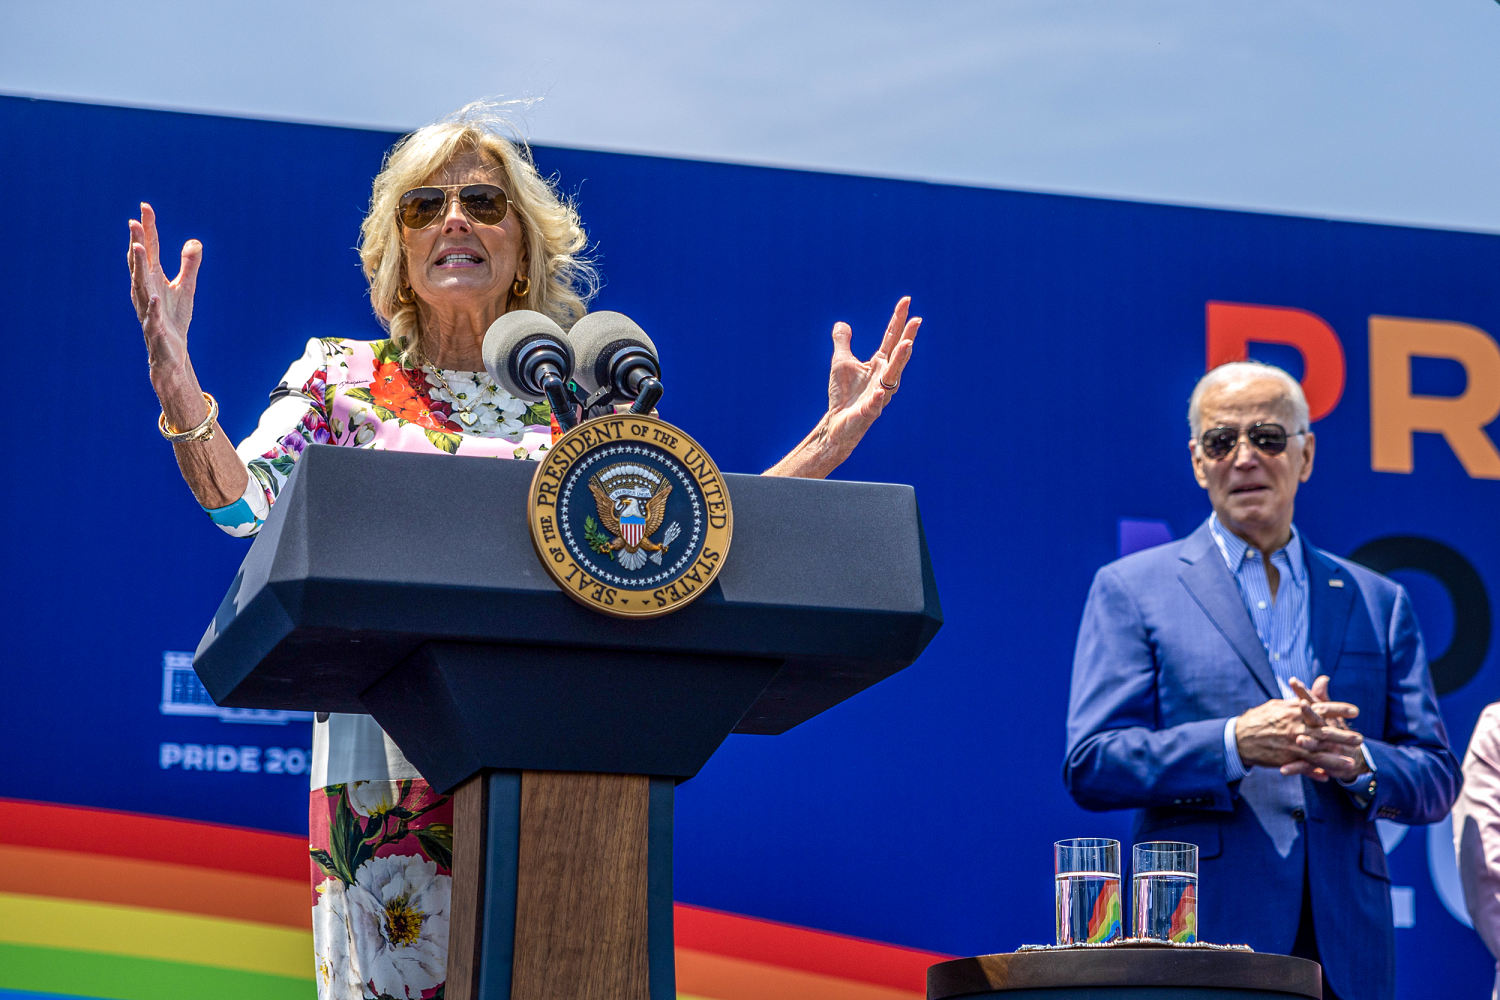 Biden campaign launches Pride Month push as allies work to shore up LGBTQ support